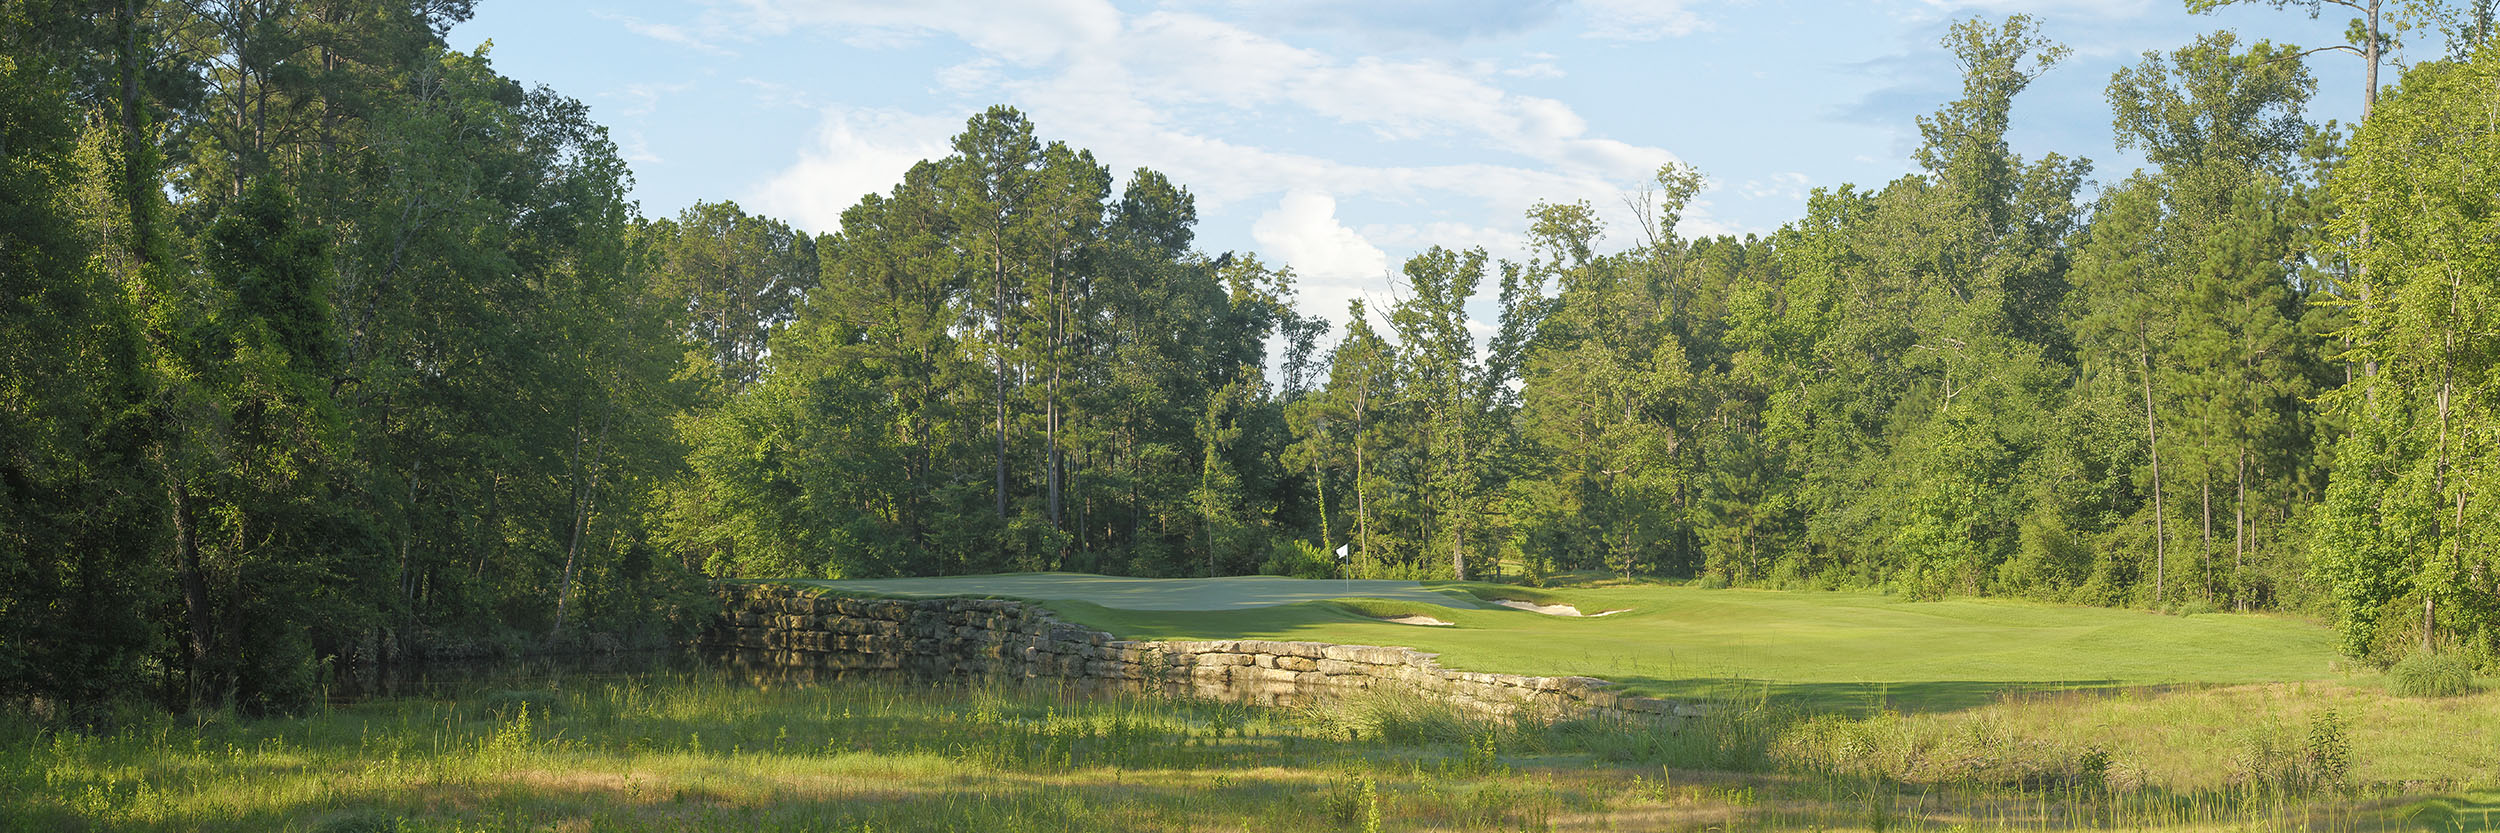 Whispering Pines Needler Course No 9